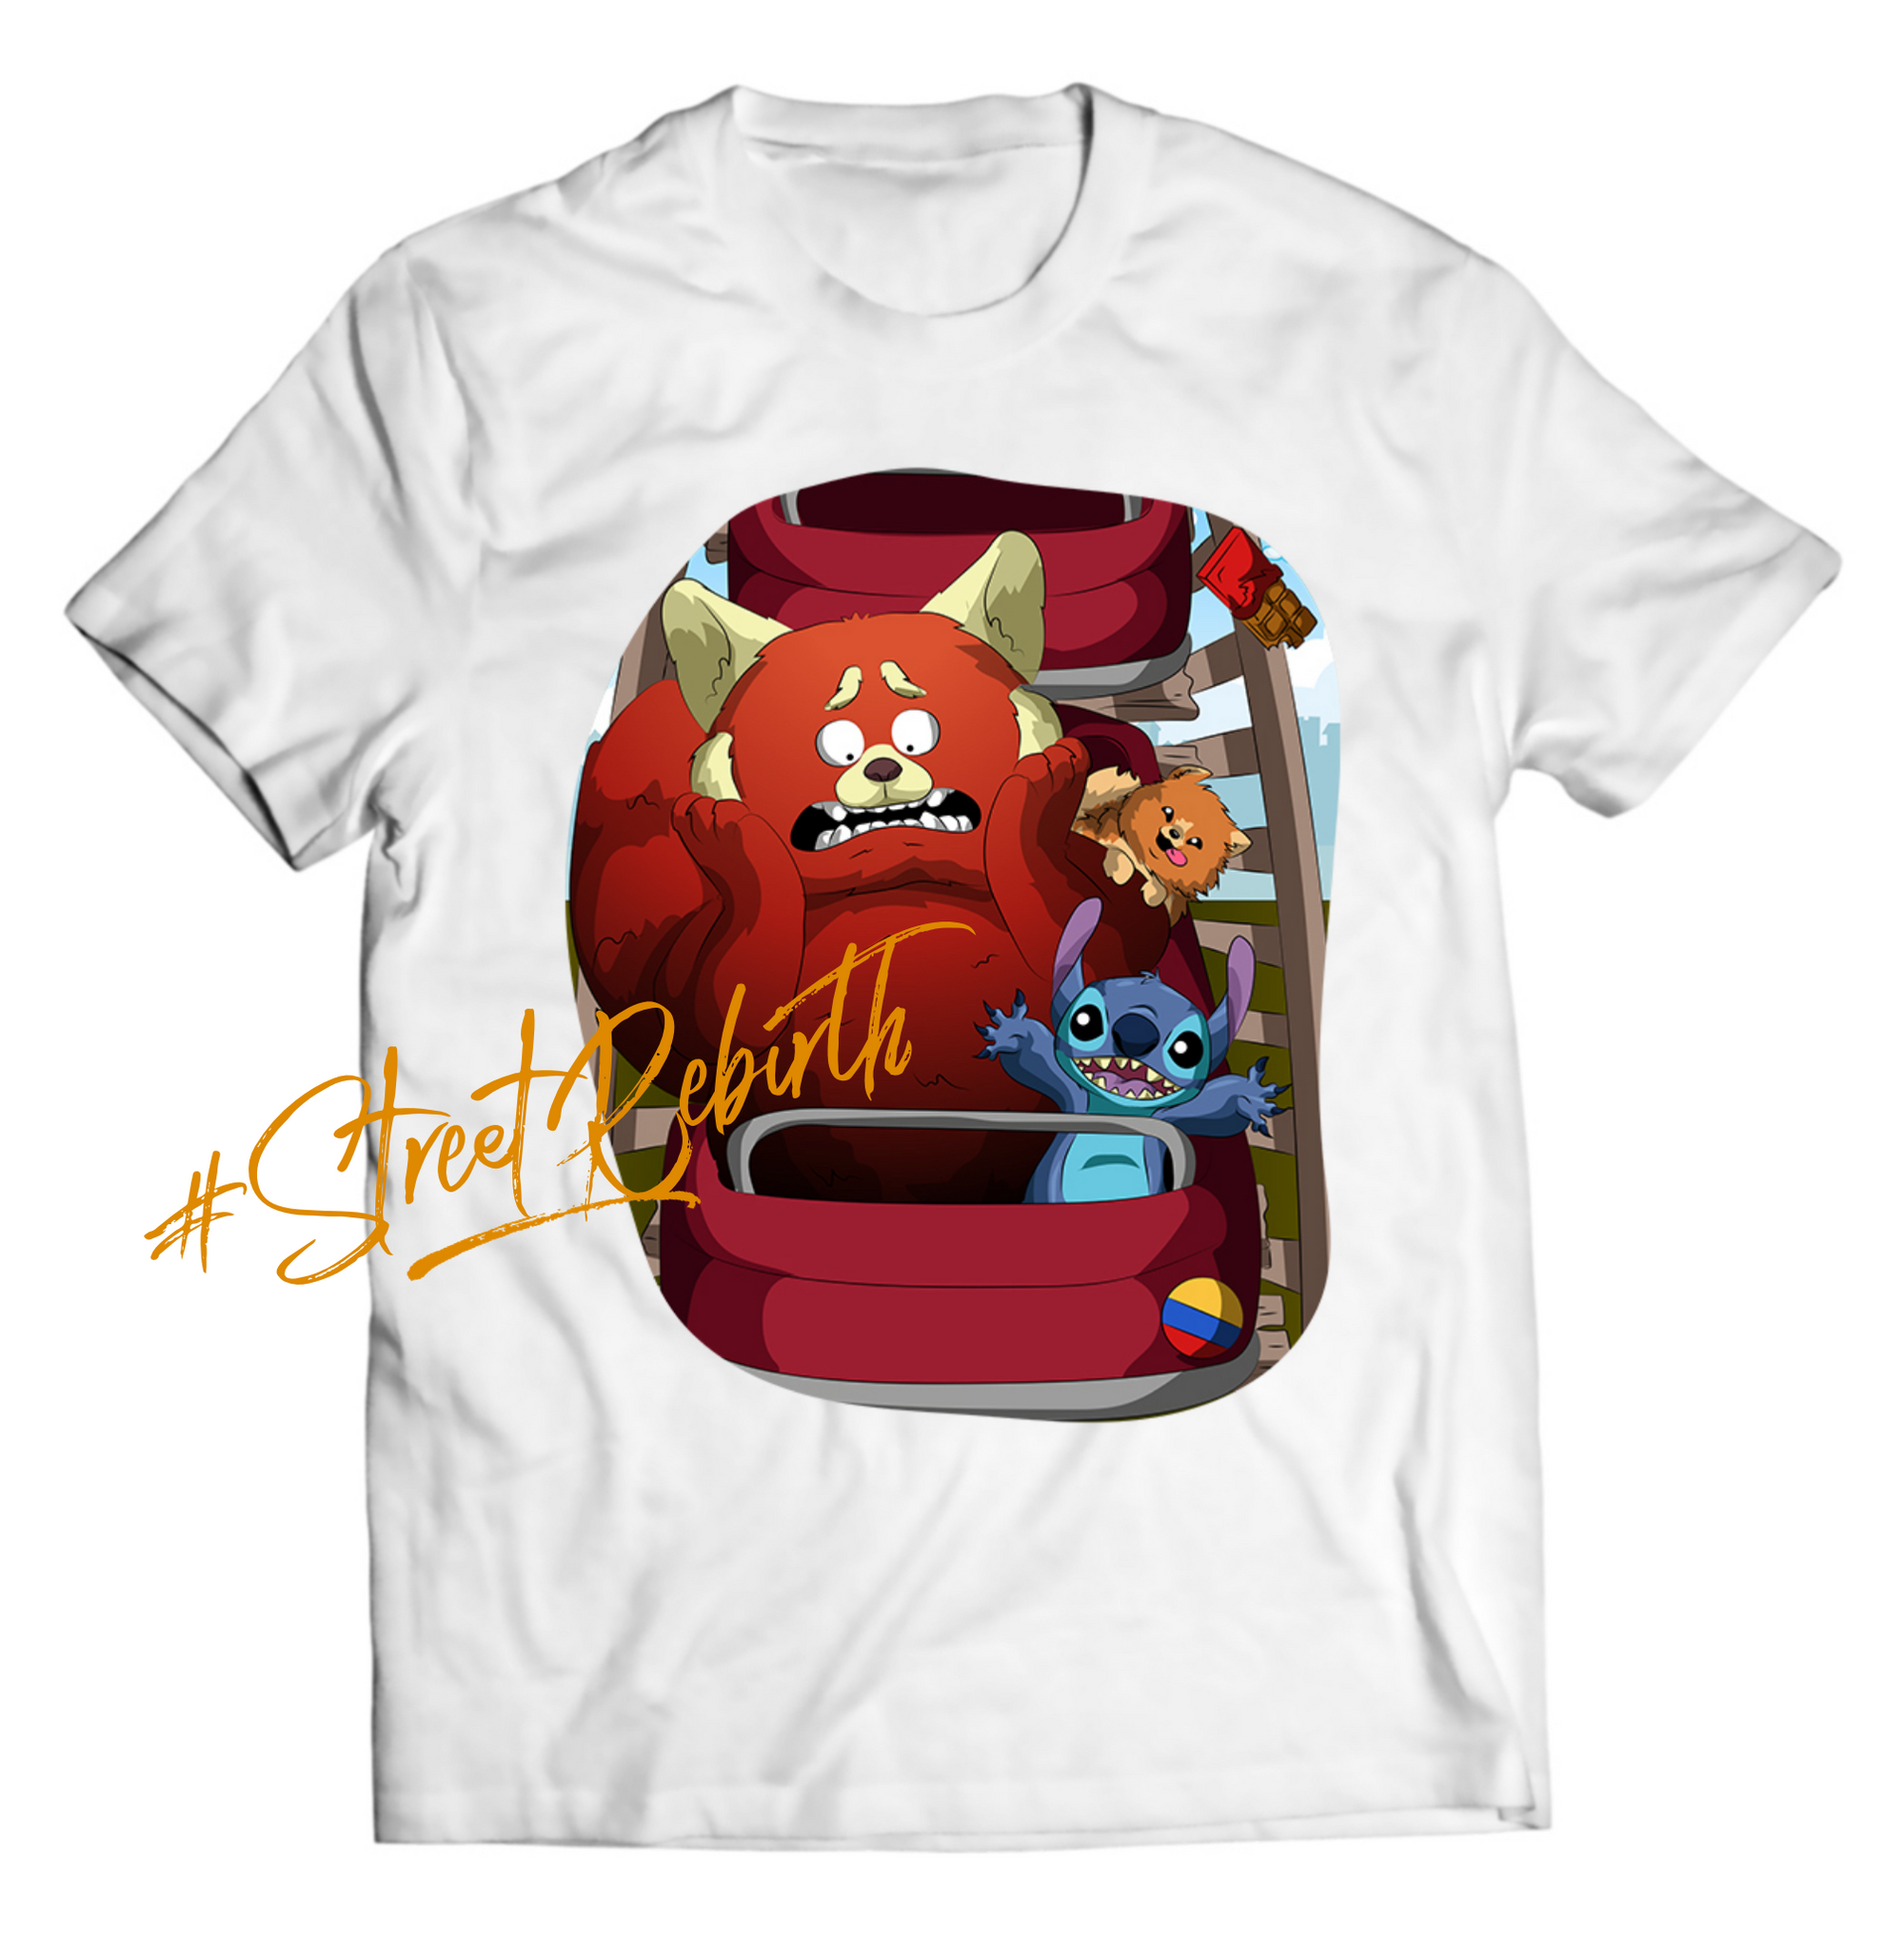 Thrills & Chills: Red Panda & Stitch with Choco Roller Coaster Adventure Shirt - Direct To Garment Quality Print - Unisex Shirt - Gift For Him or Her